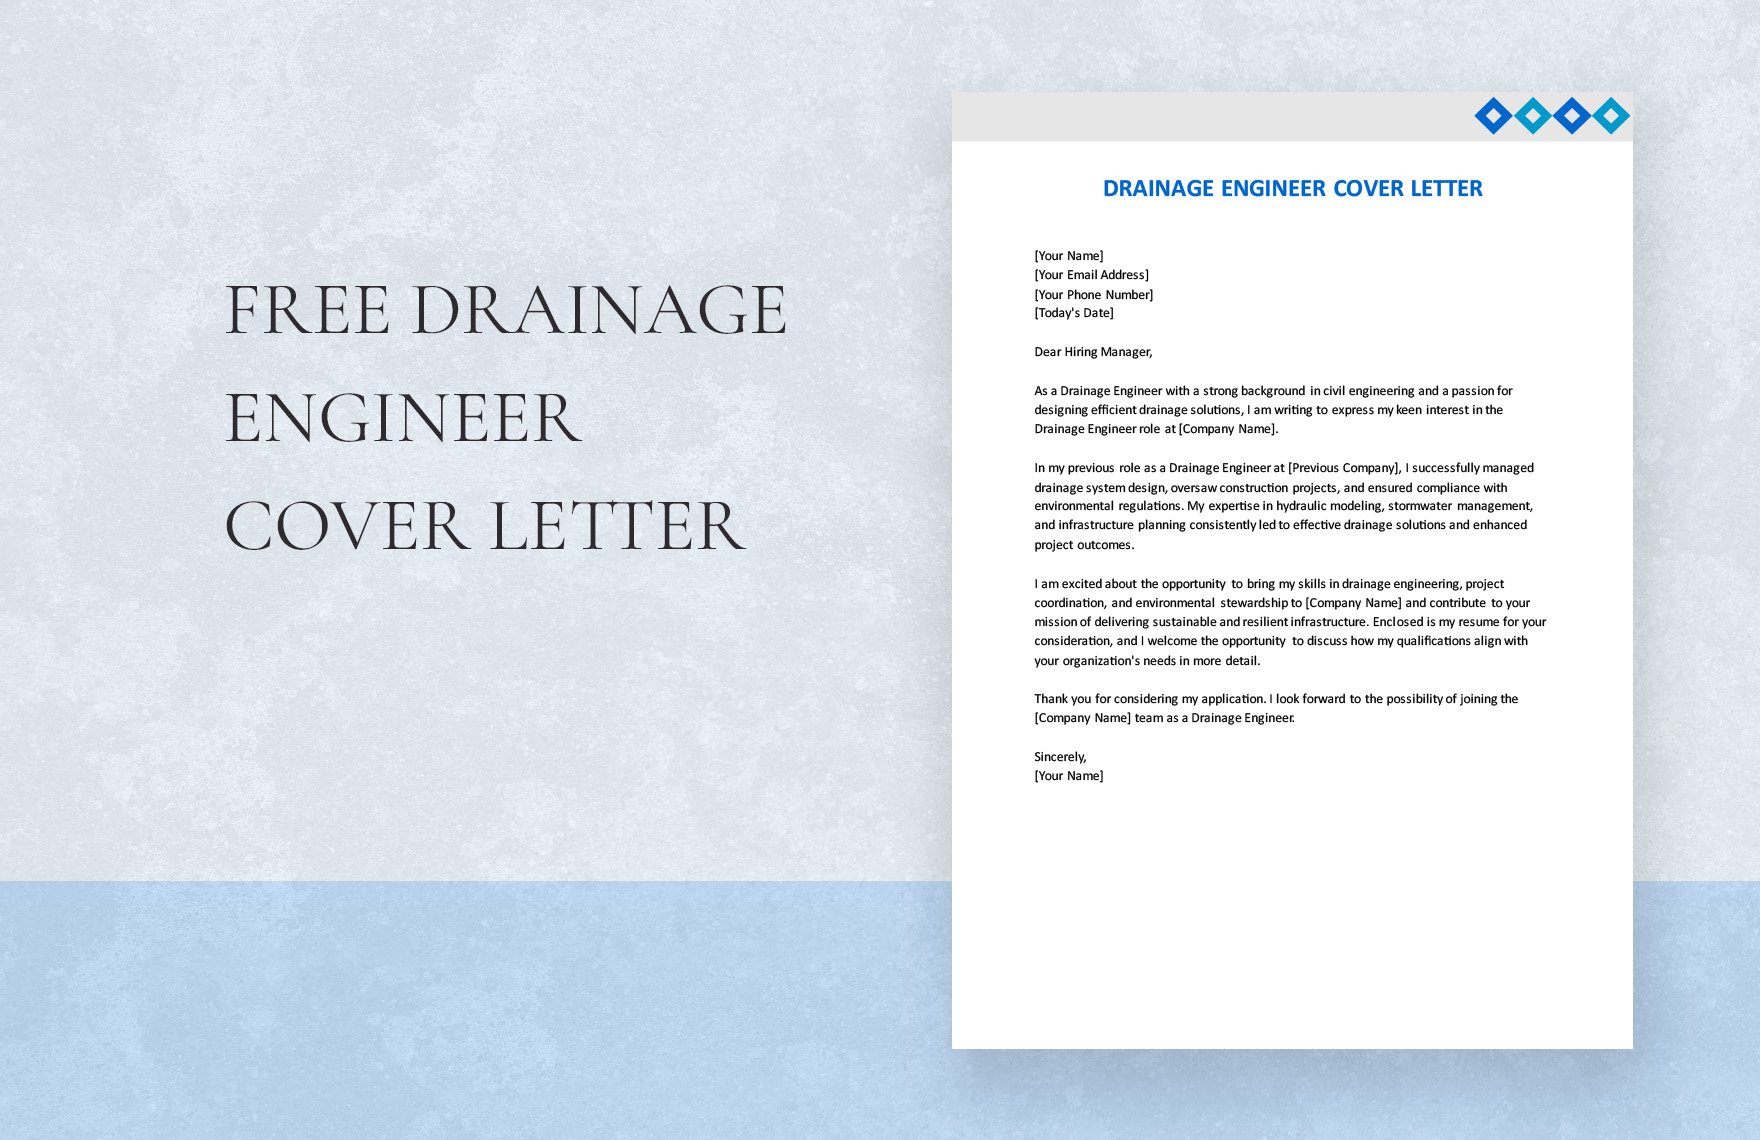 Drainage Engineer Cover Letter in Word, Google Docs, PDF